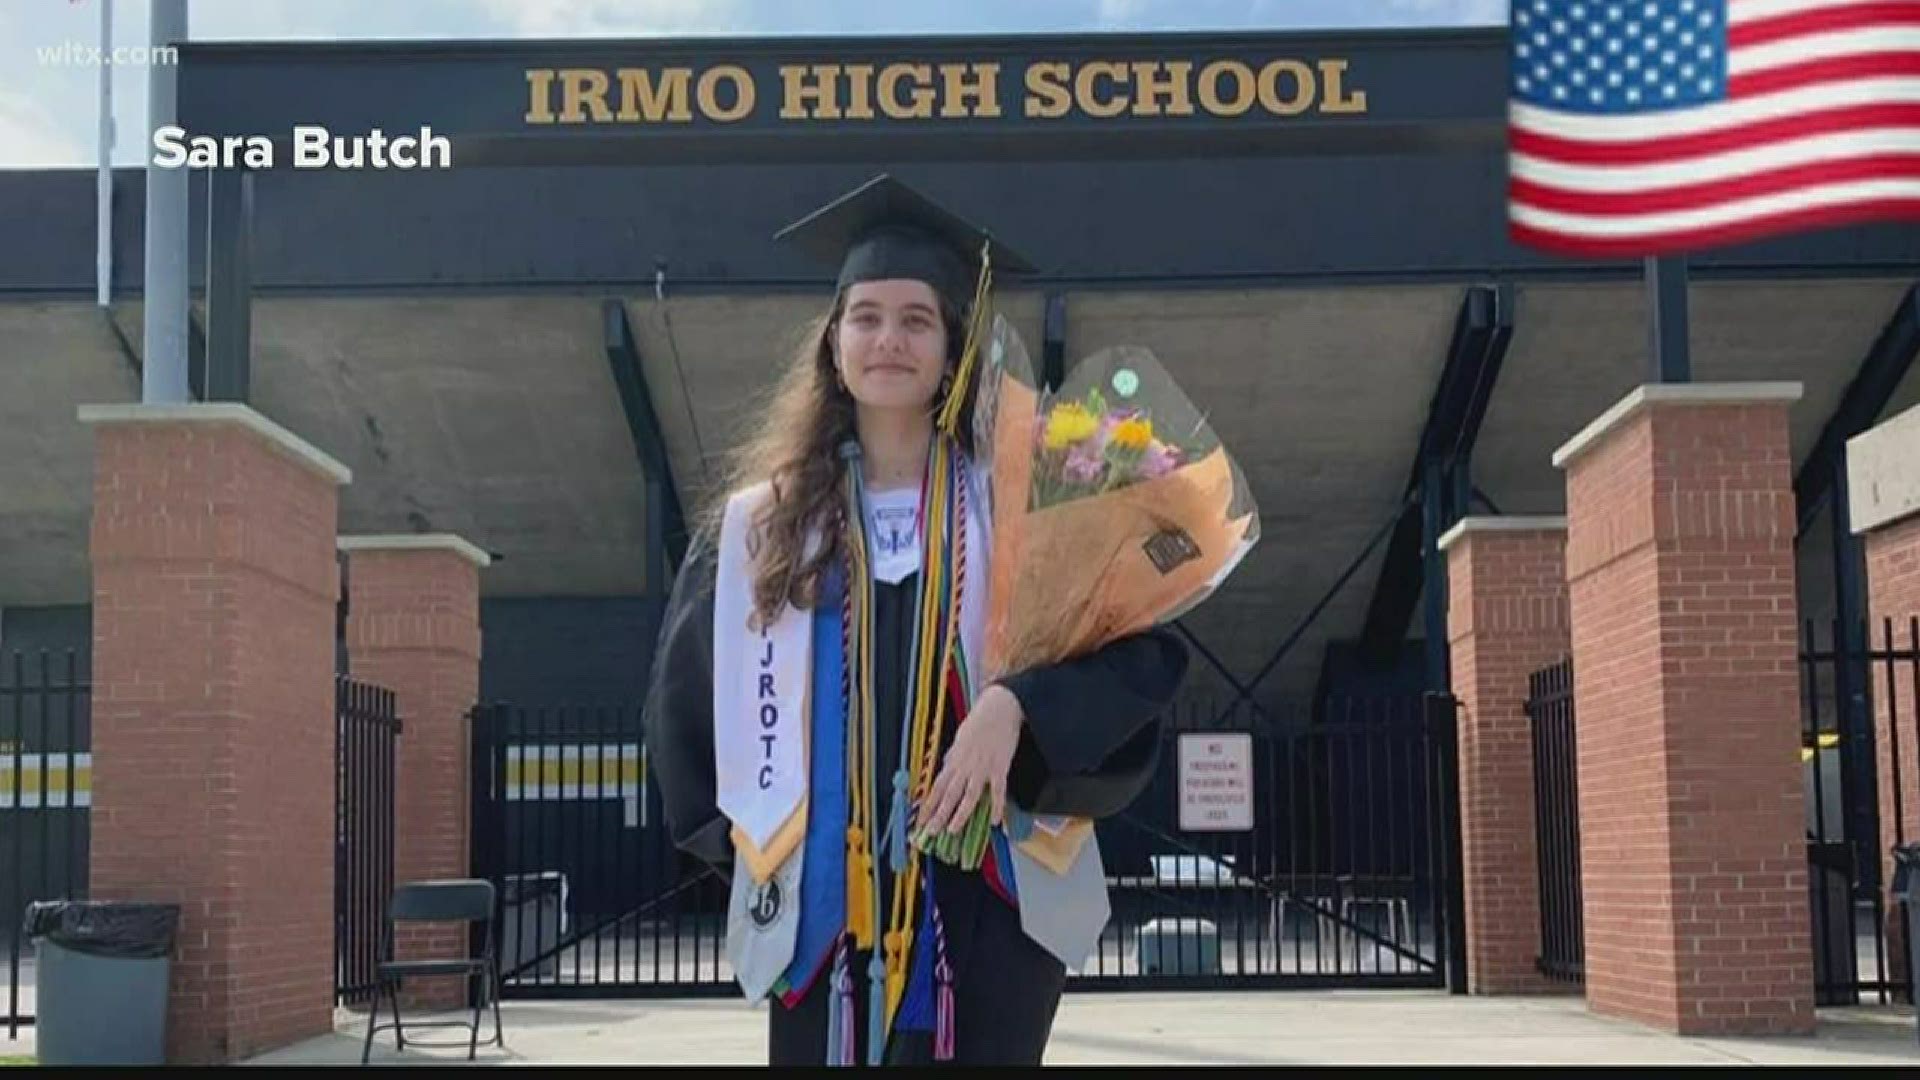 She is one of 38 students in the state who were able to do this